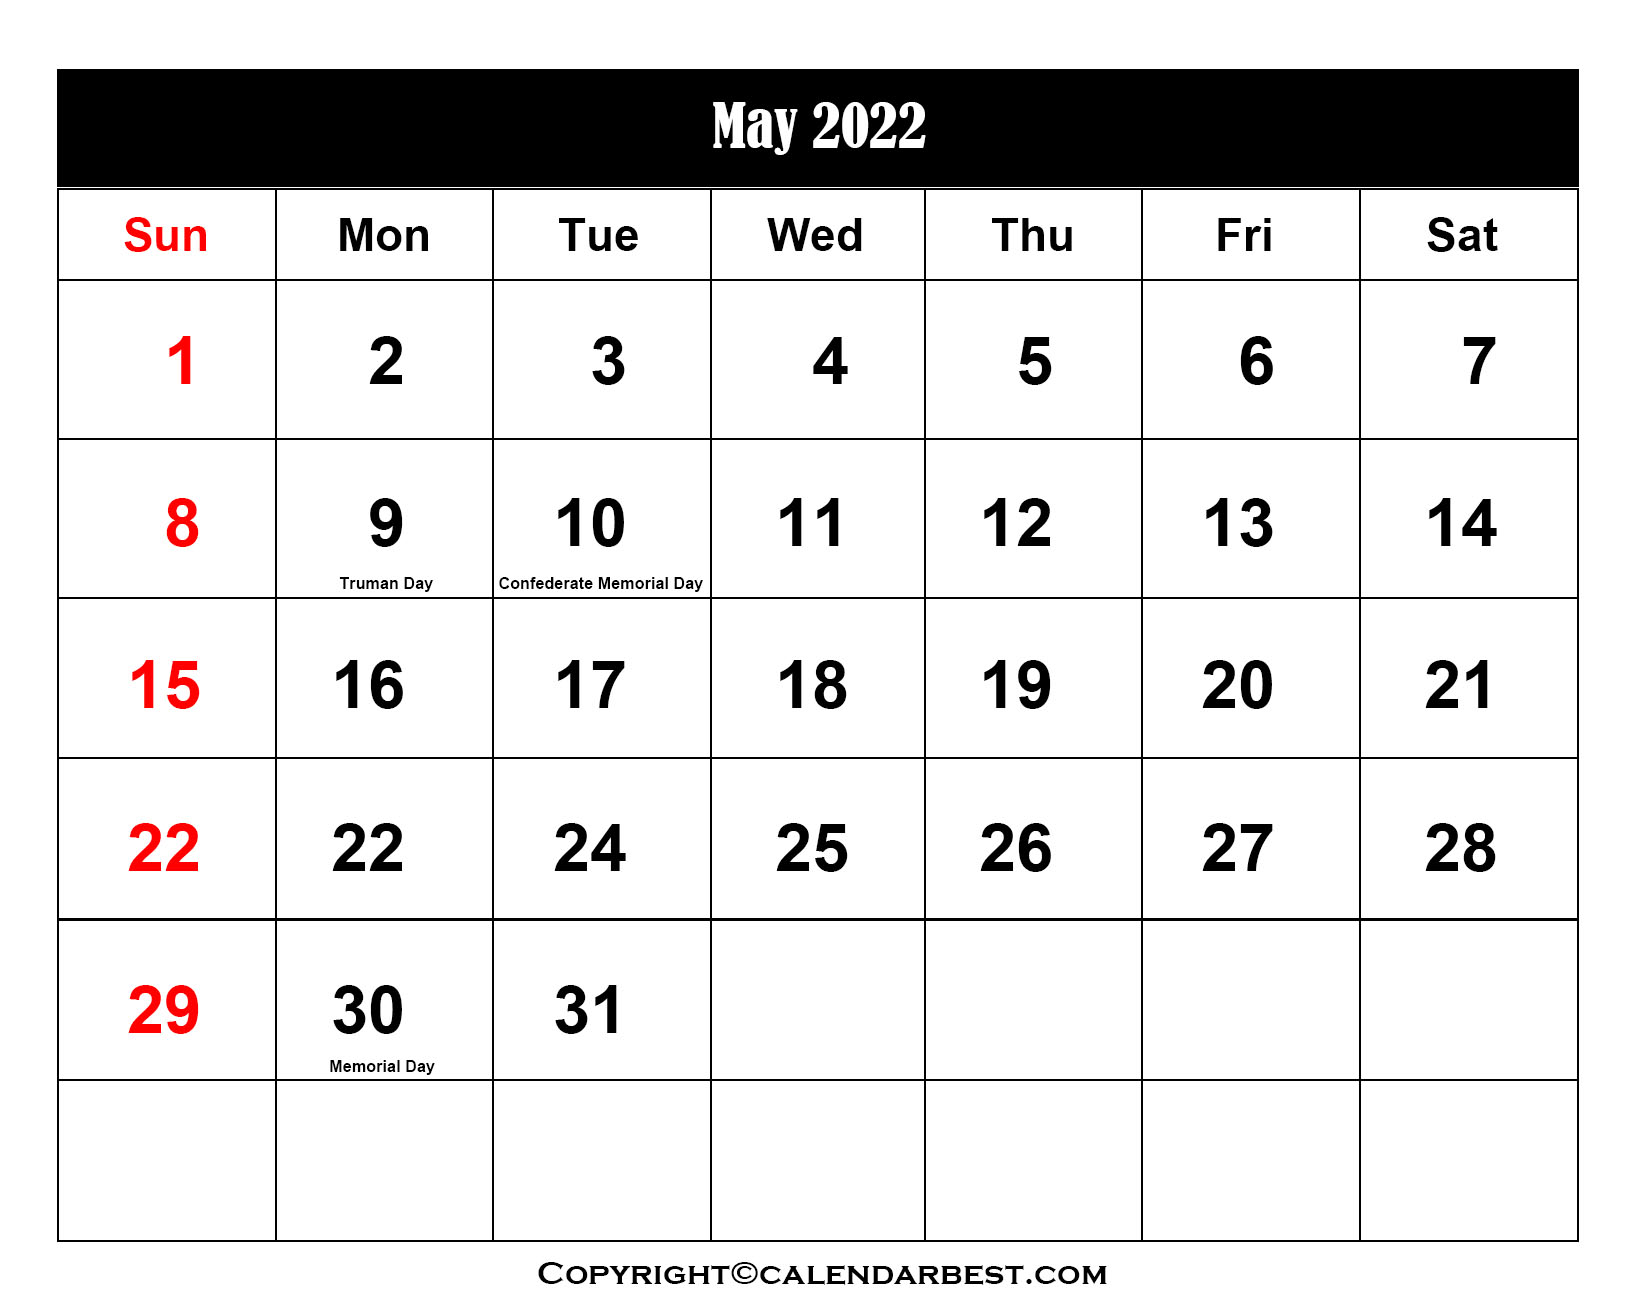 Free Printable May Calendar 2022 with Holidays in PDF